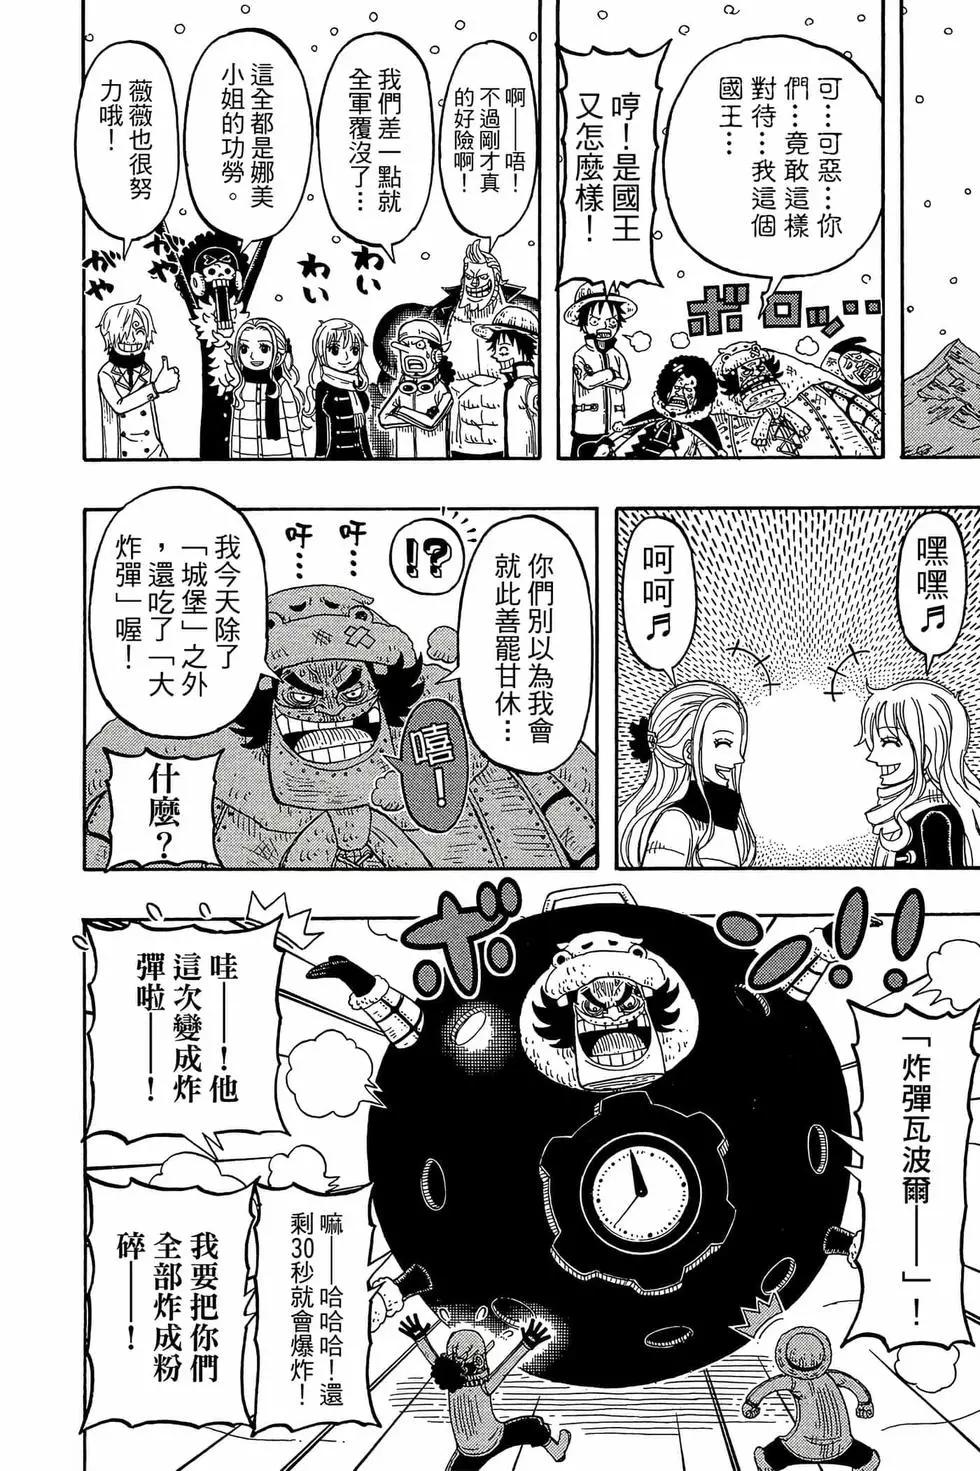 One piece party - 第03卷(1/4) - 3